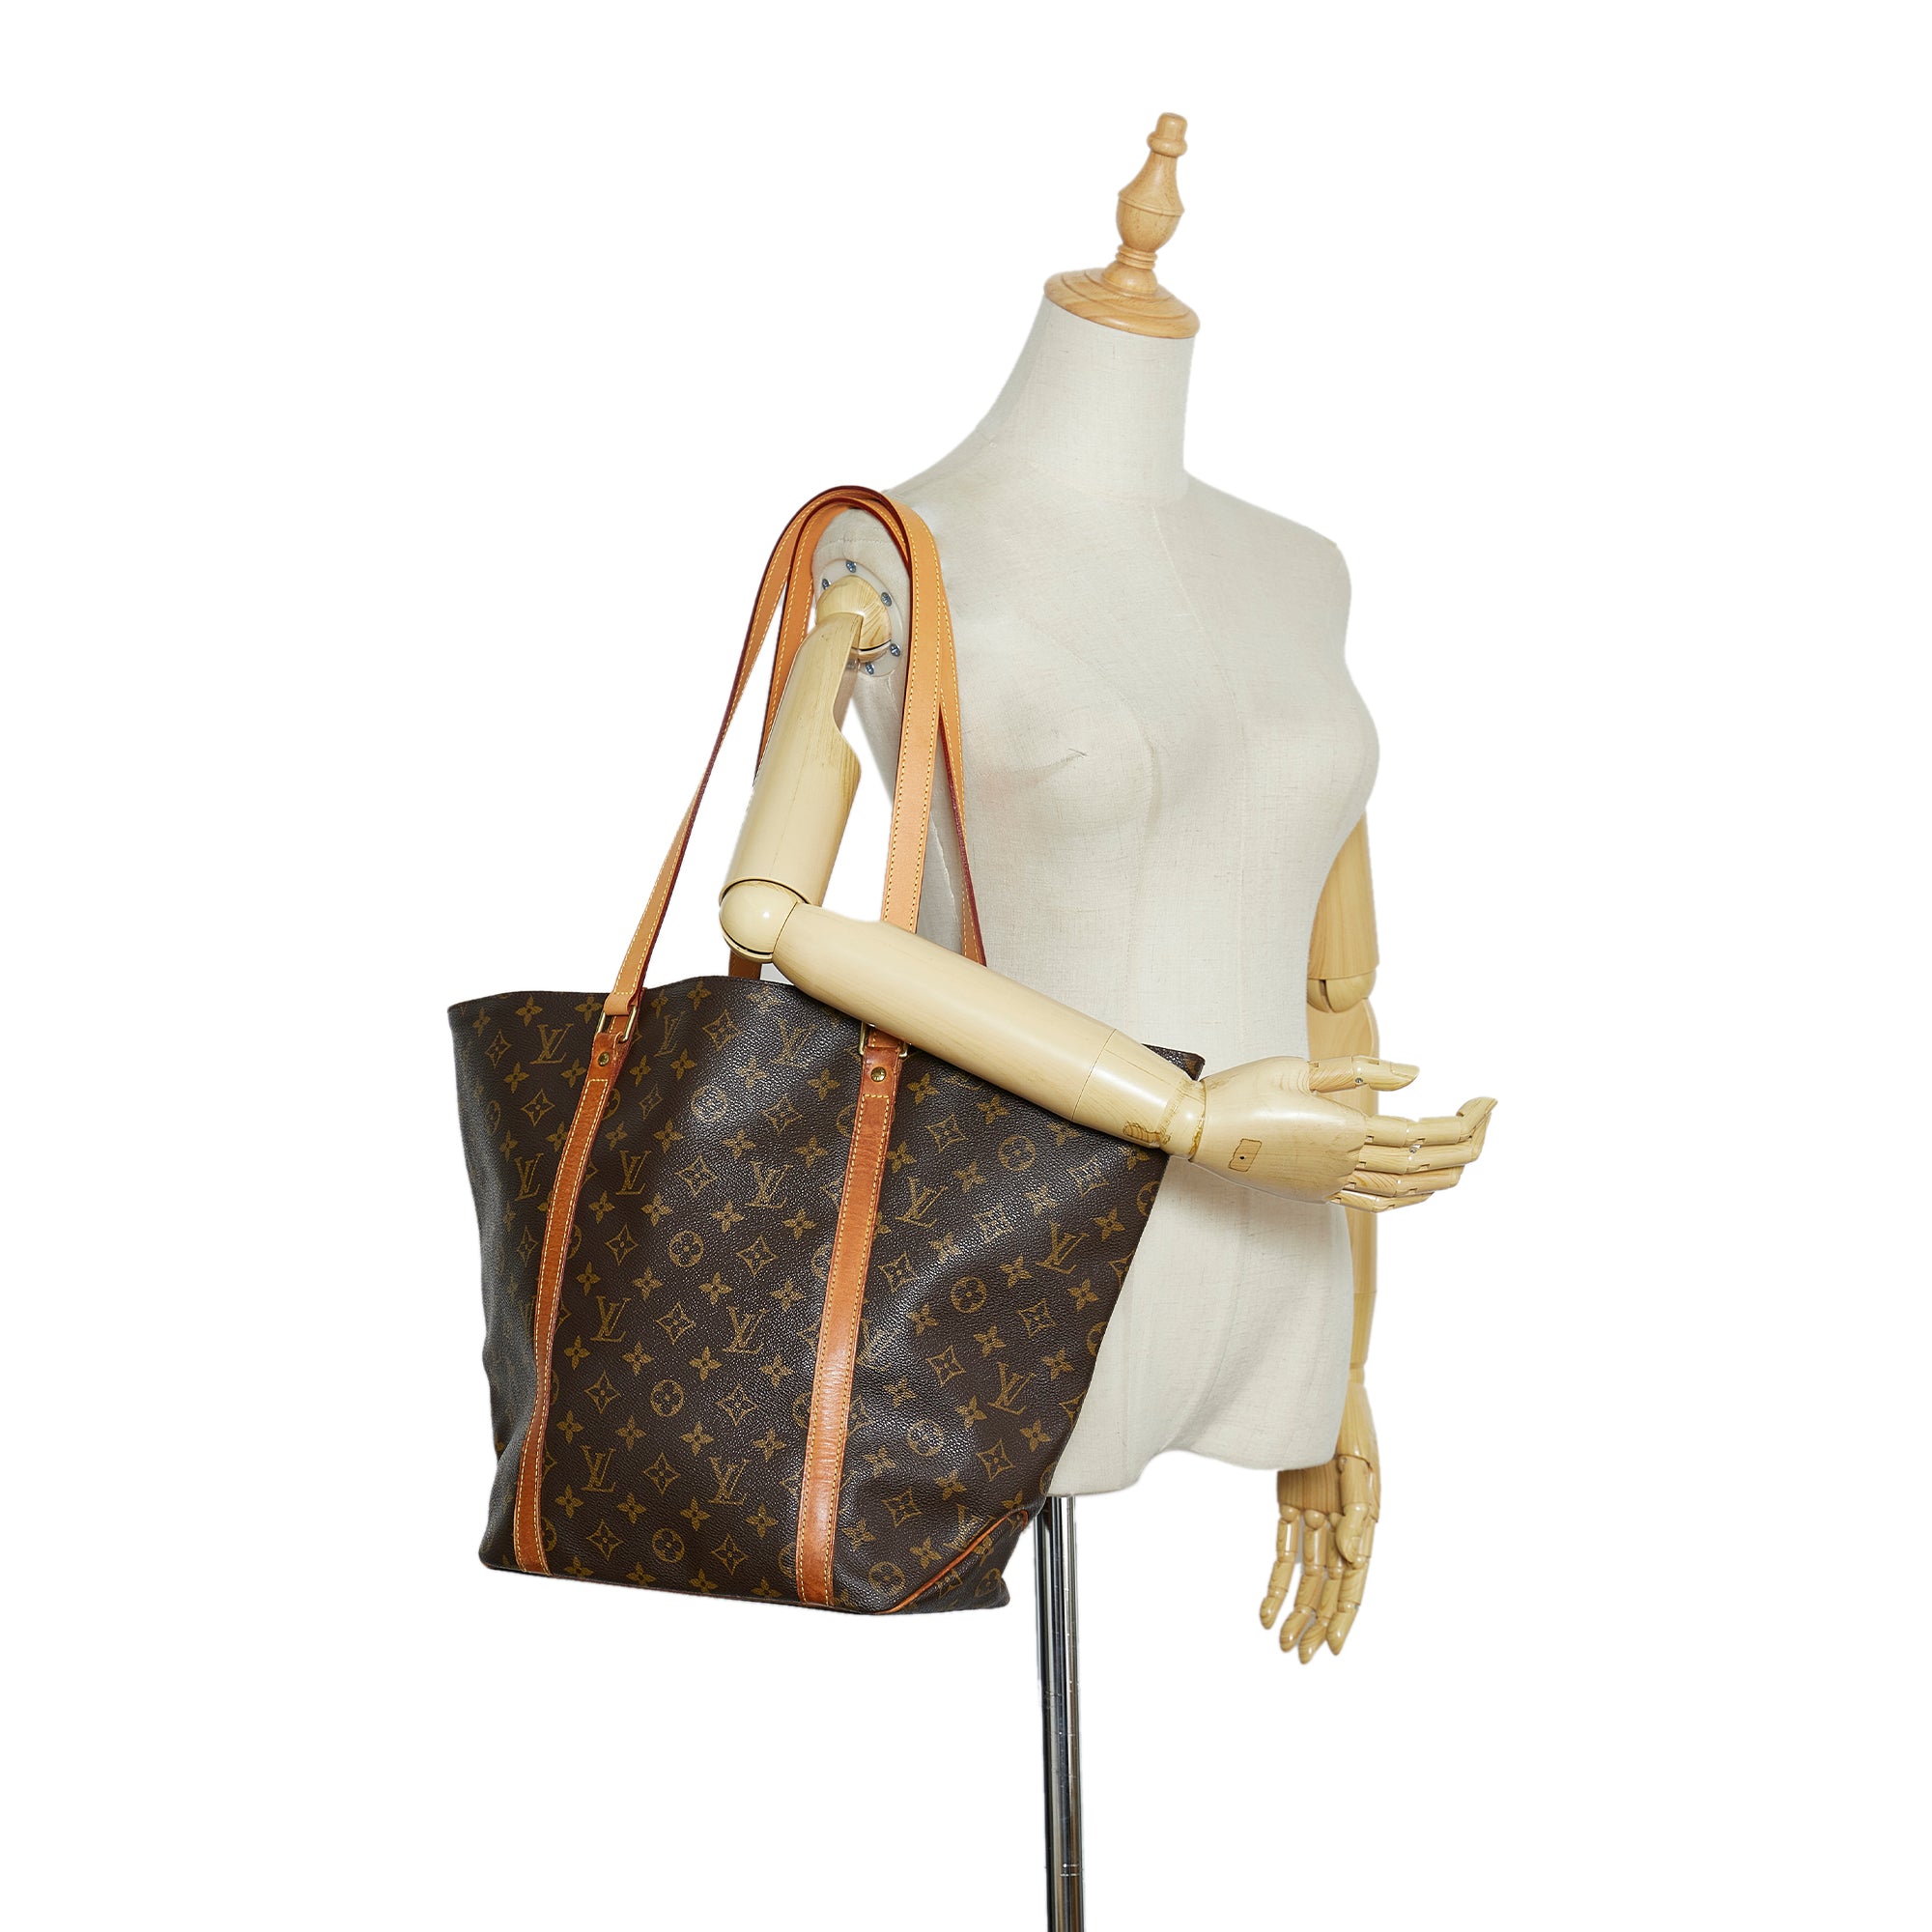 Shop for Louis Vuitton Monogram Canvas Leather Sac Shopping Tote